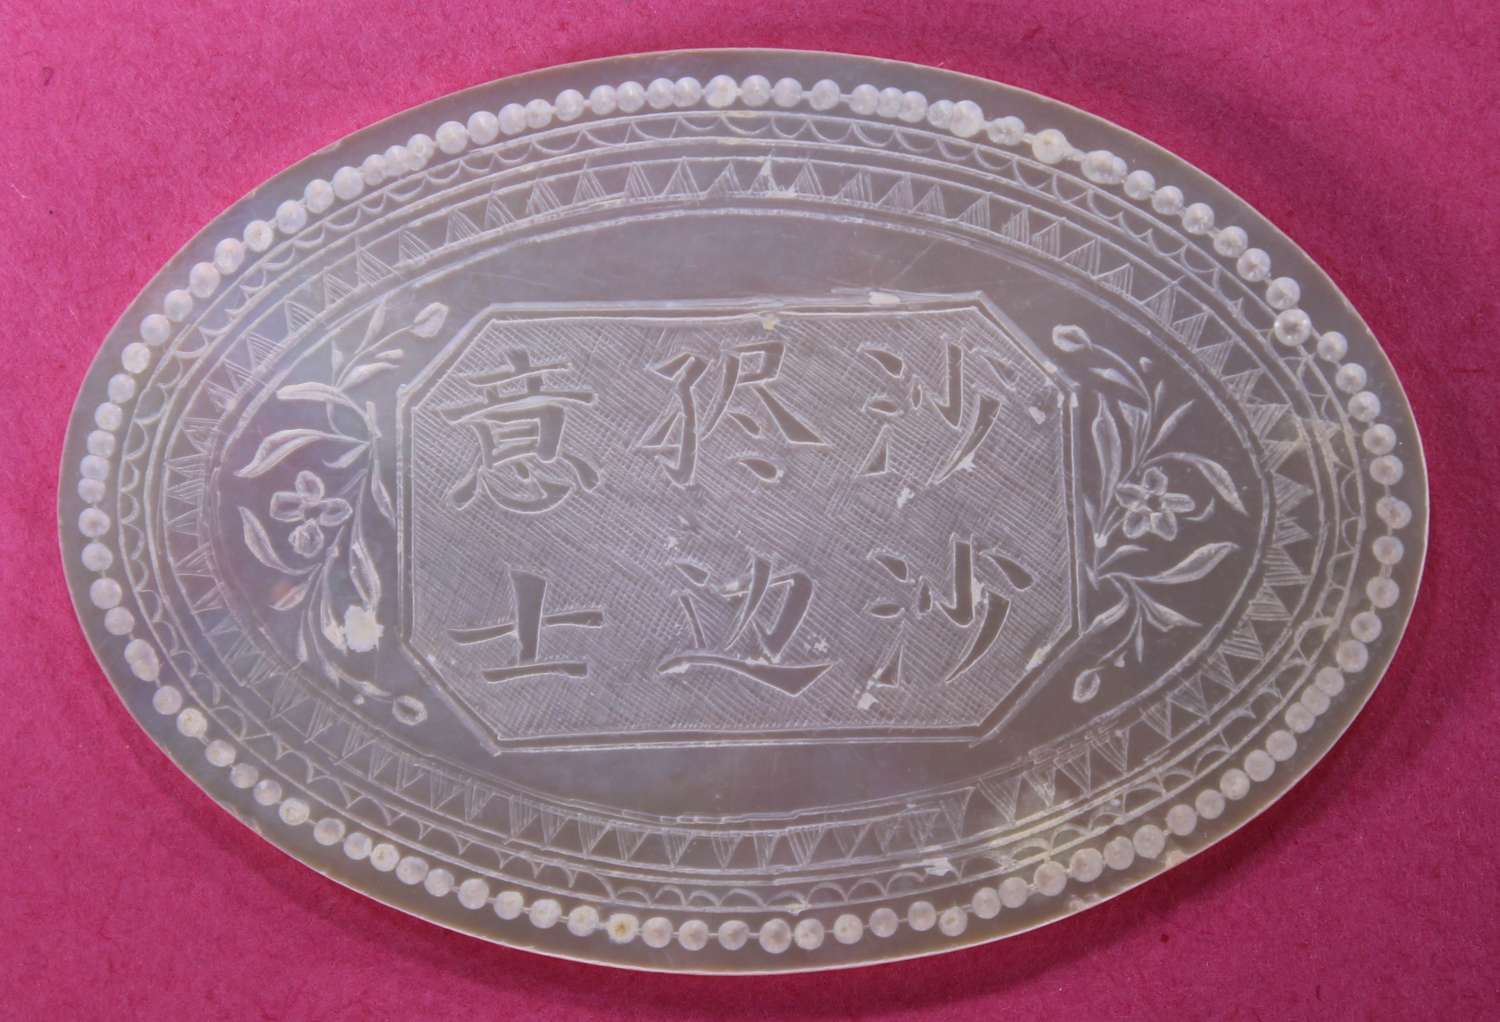 Rare counter with Chinese inscription